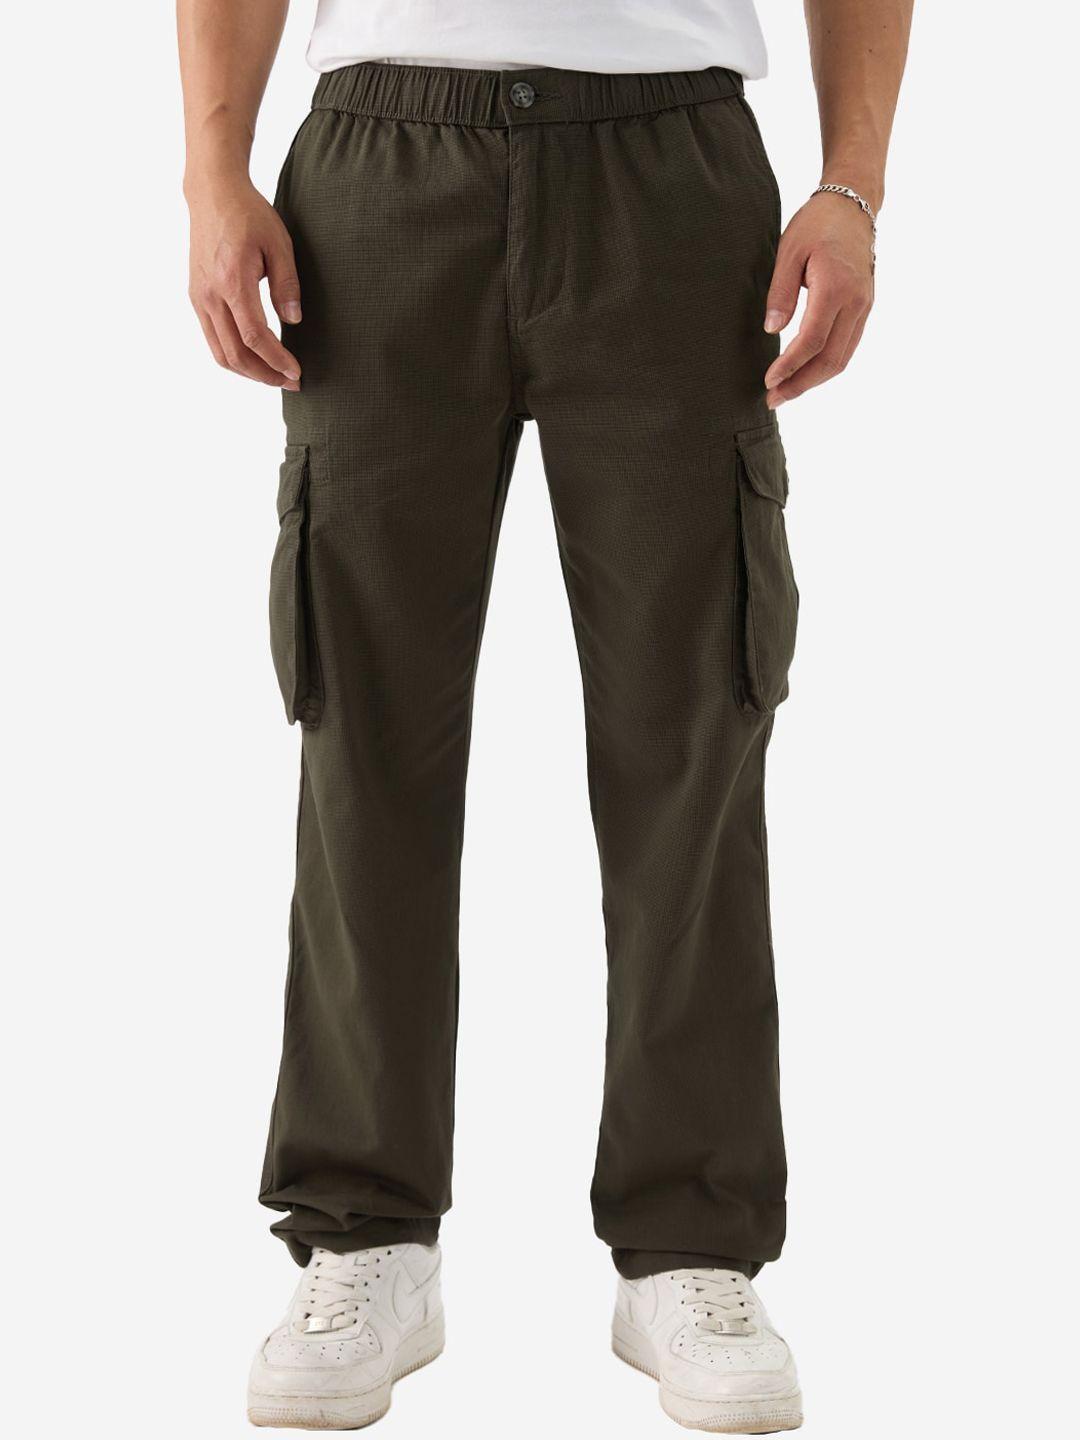 the-souled-store-men-cargos-trousers